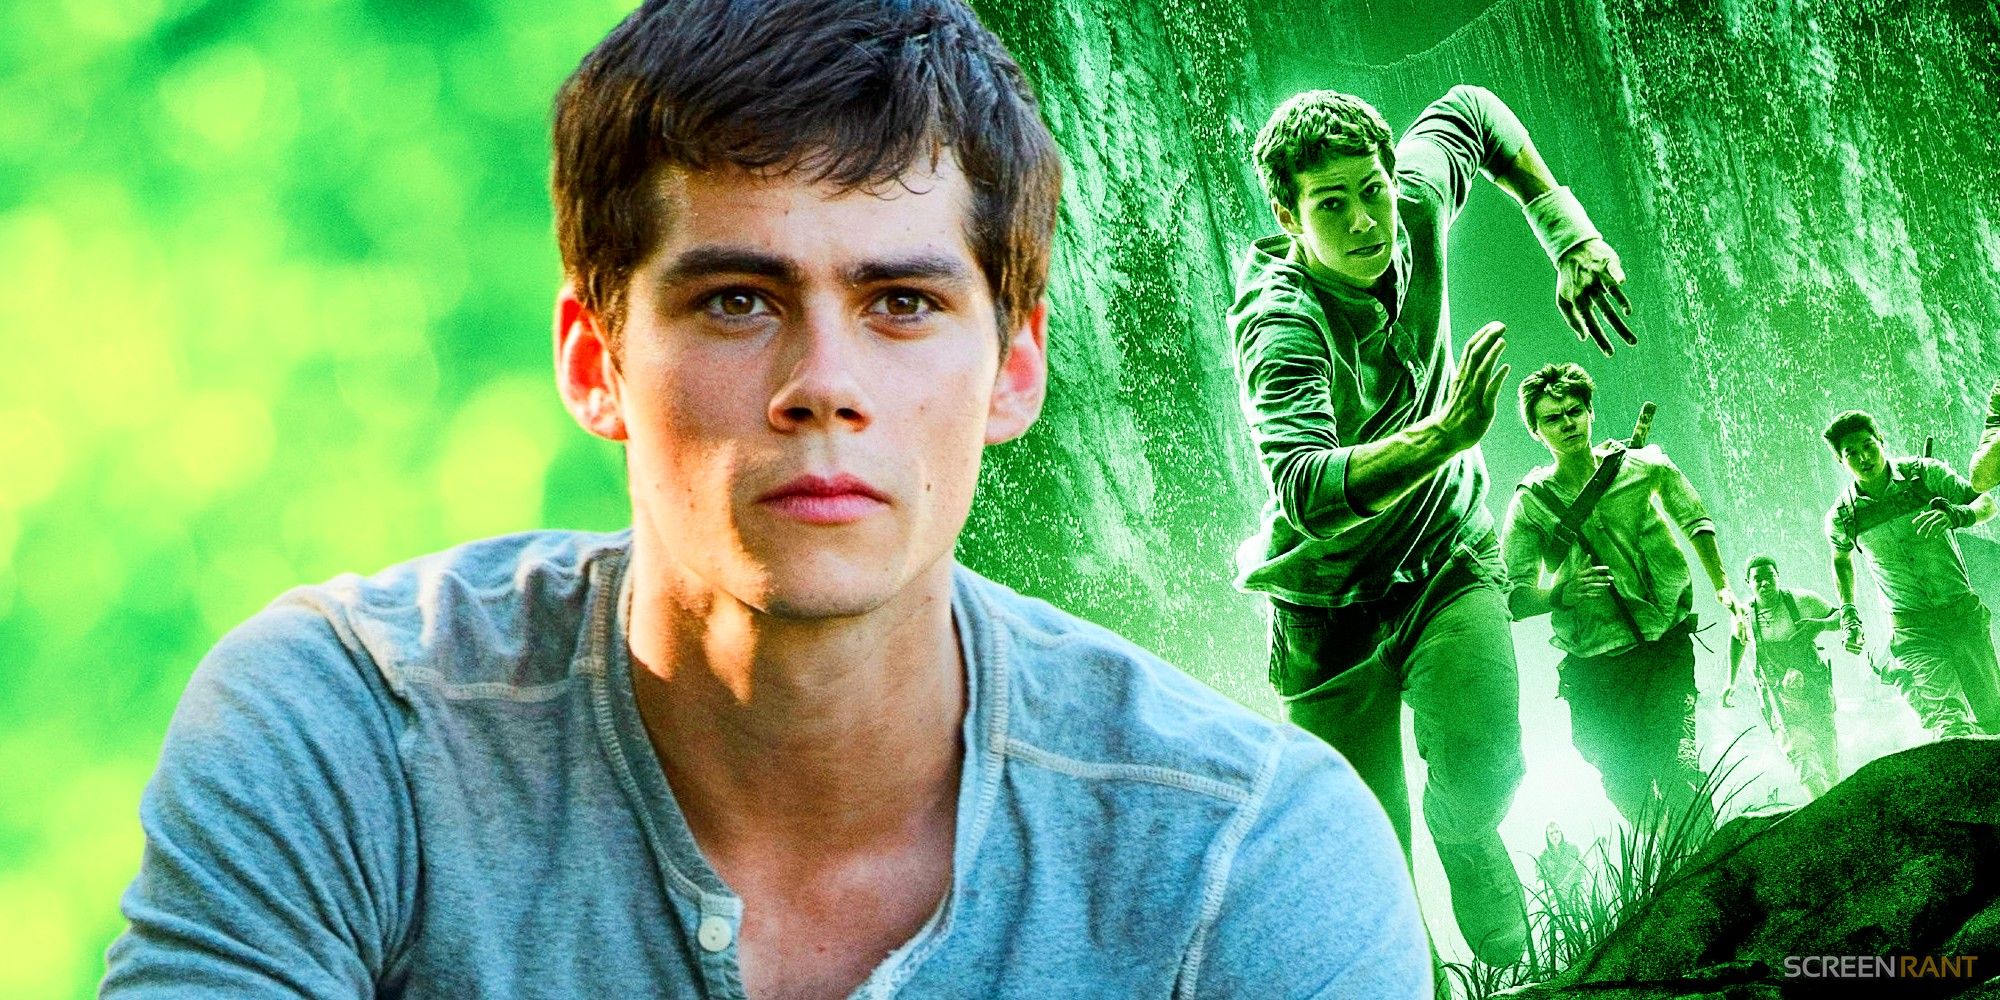 Dylan O'Brien Had The Perfect Maze Runner Franchise Replacement